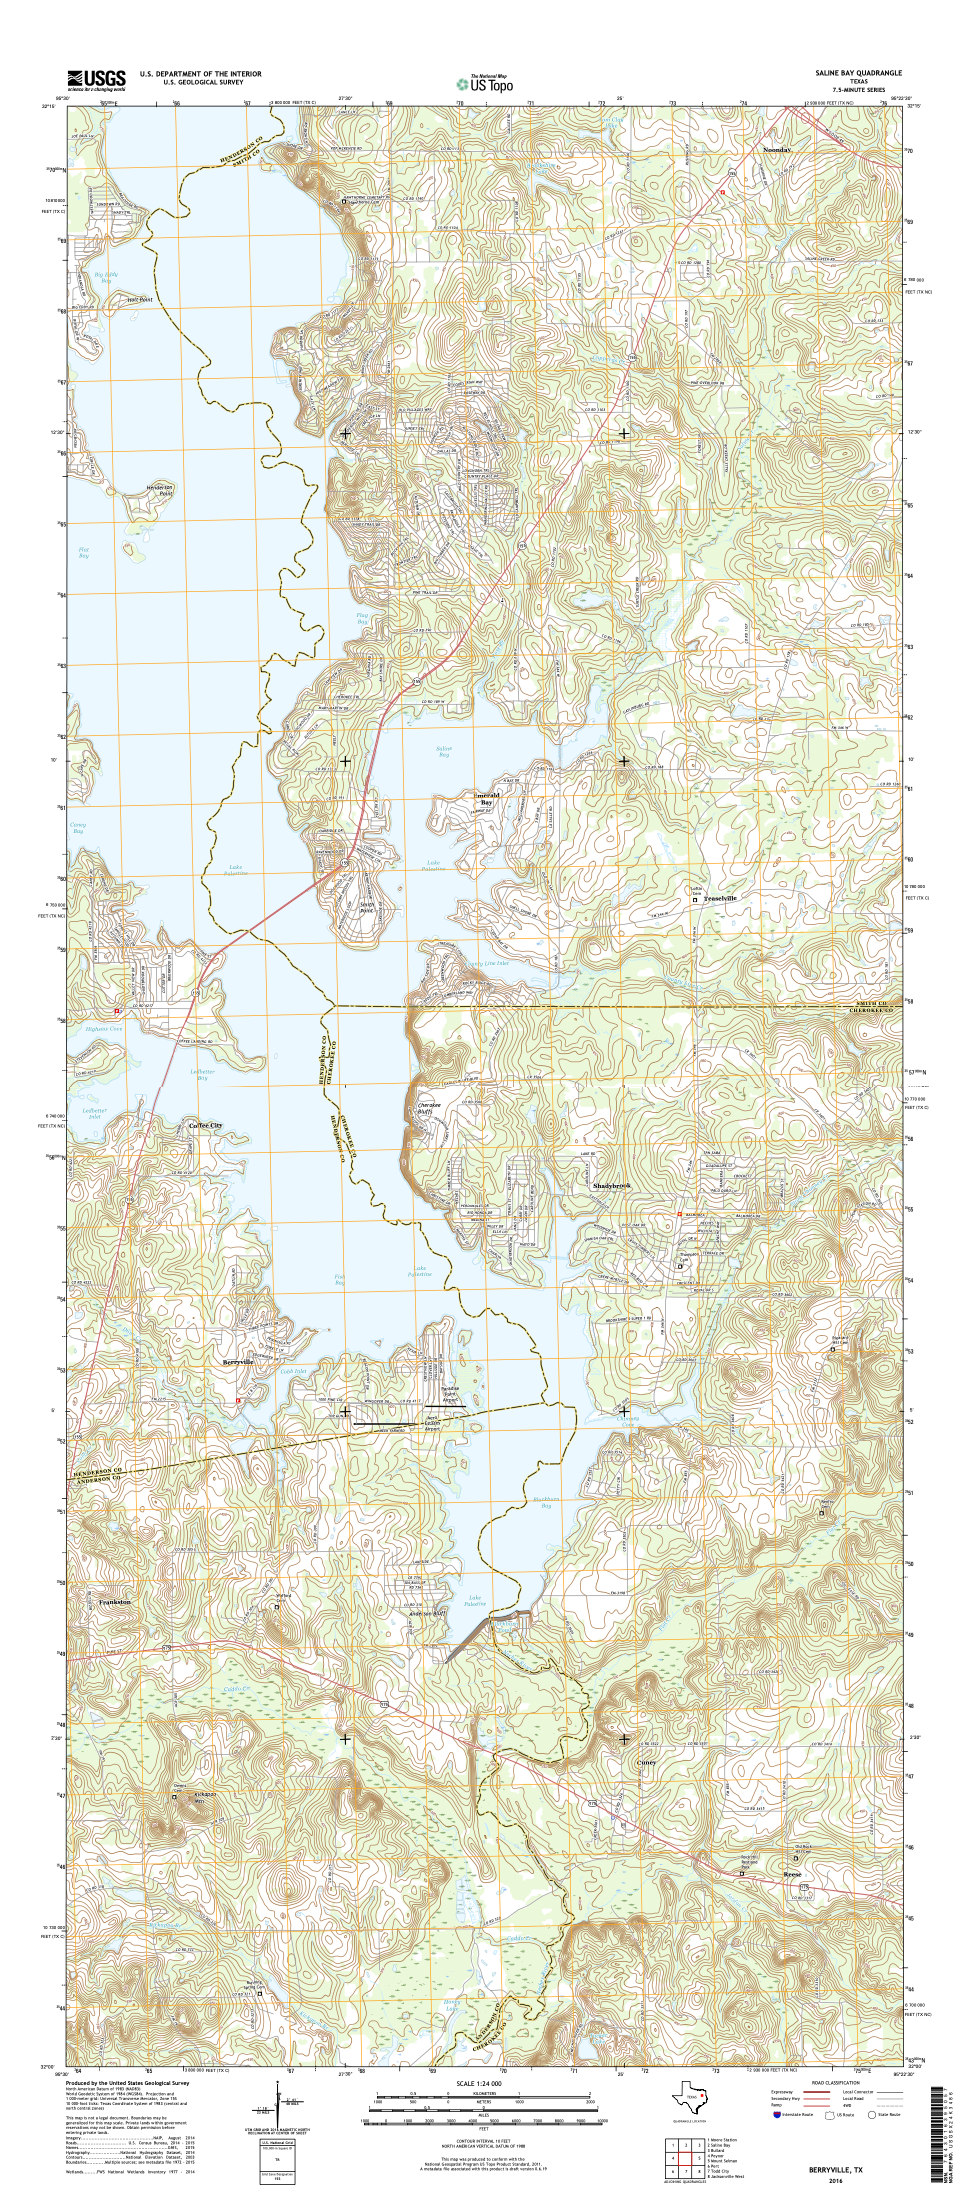 USGS Topo Map of the southern sections of Lake Palestine